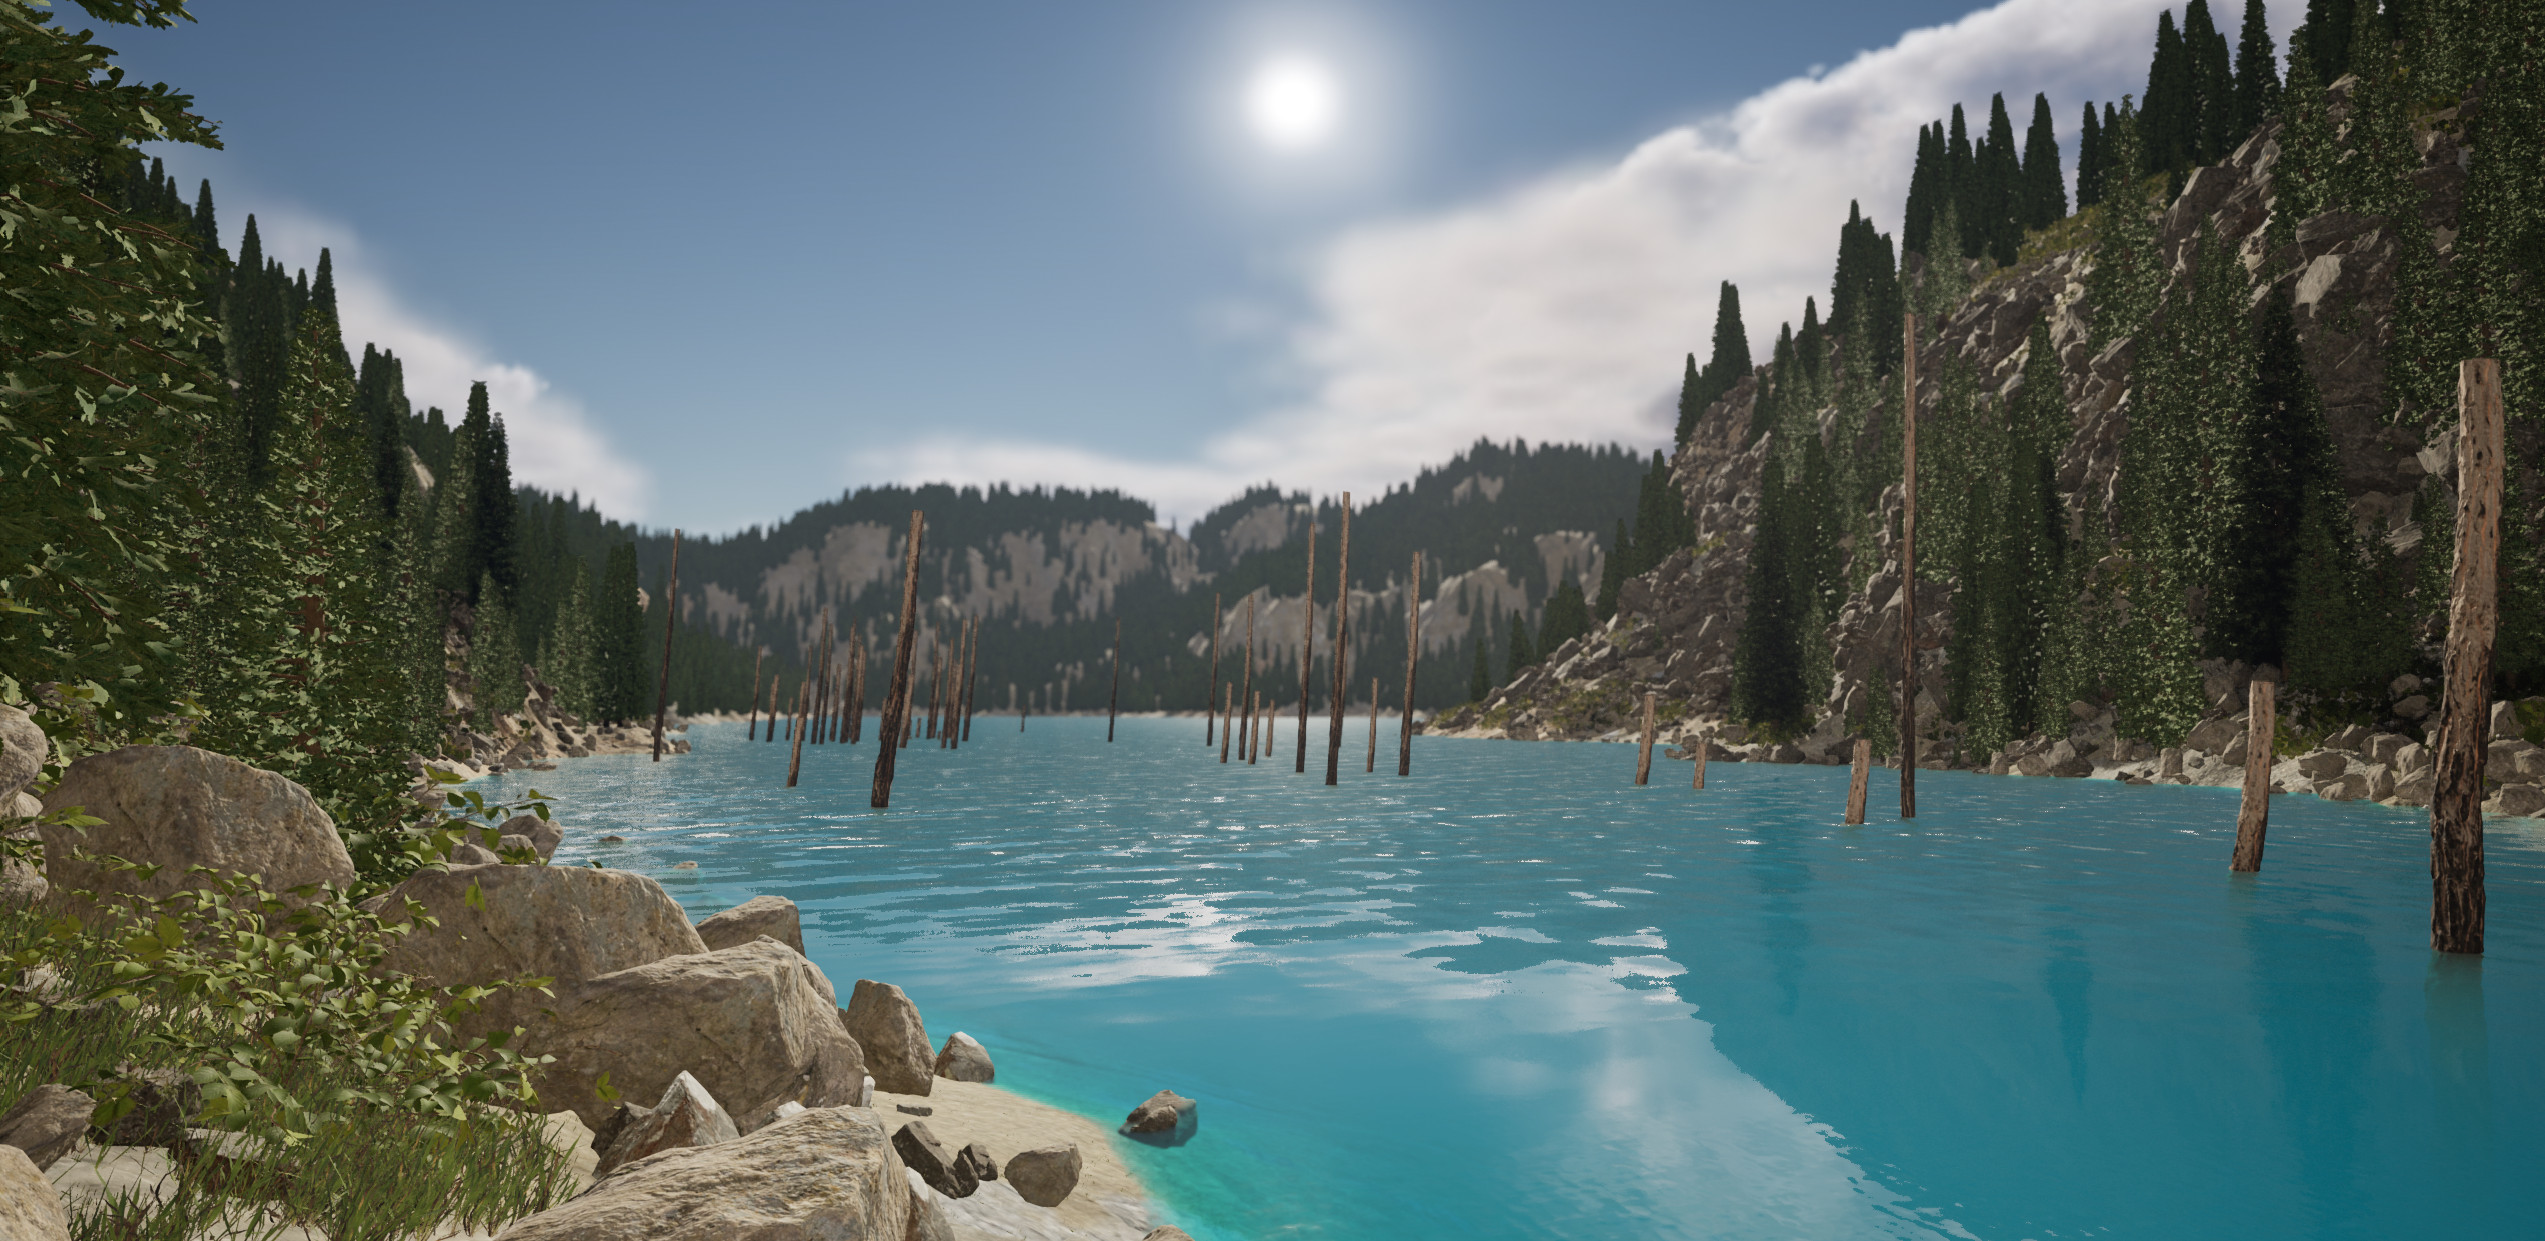 Landscape scene inspired by Lake Kaindy in Kazakhstan. Scene assembled in UE4. Landscape heightmaps and heatmaps created in World Creator 2. Spruce model created in SpeedTree 9. Landscape materials, rocks and other foliage assets from Quixel